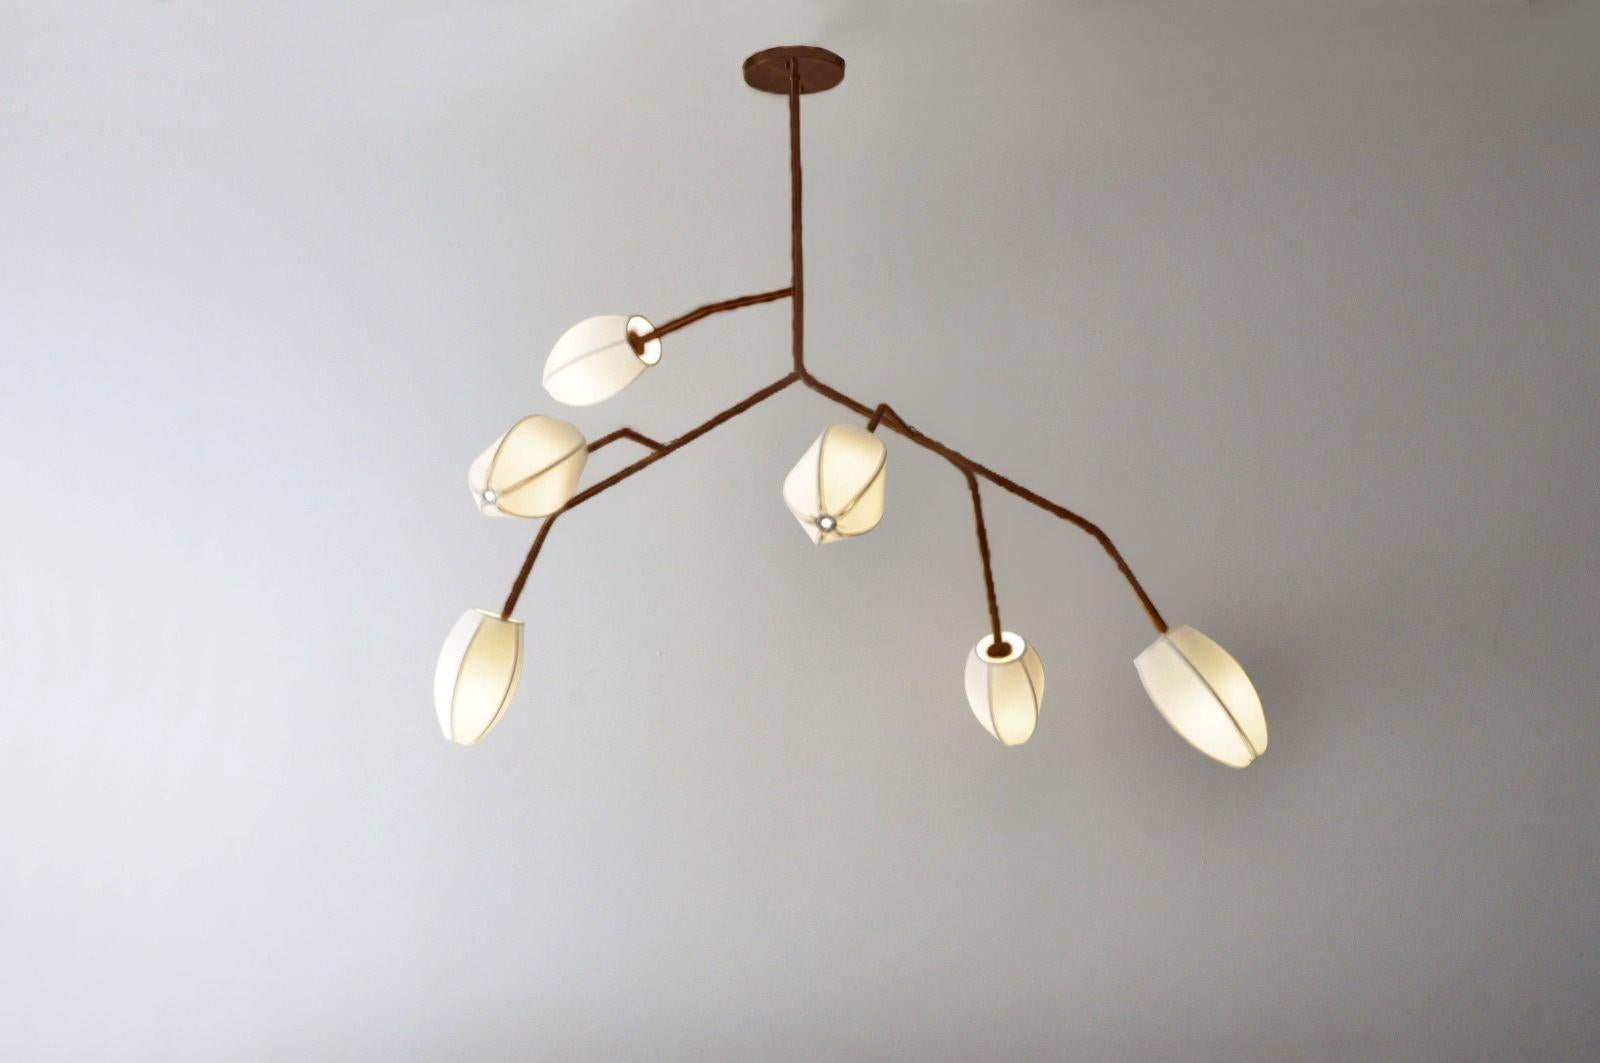 This pendant is named Sacurá Max. It is a Sculptural light pendant in steel. It can be paited in black, white ou brown (corten). It has 6 domes. The mall cotton domes in various colors.

The design of this pendant light is based on cherry trees with